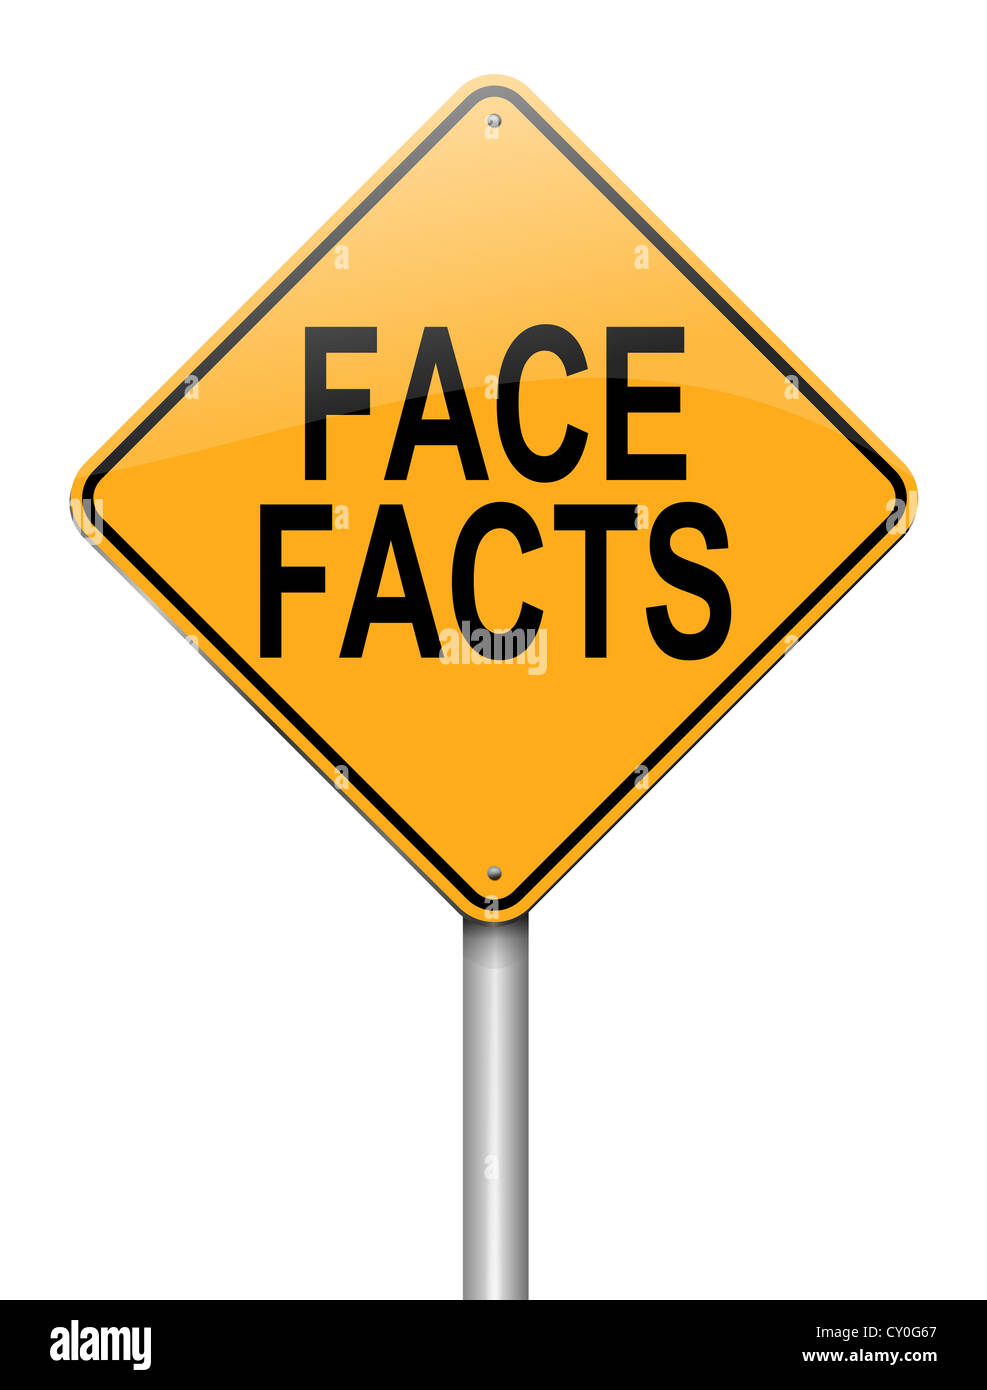 Face facts. Face the fact.